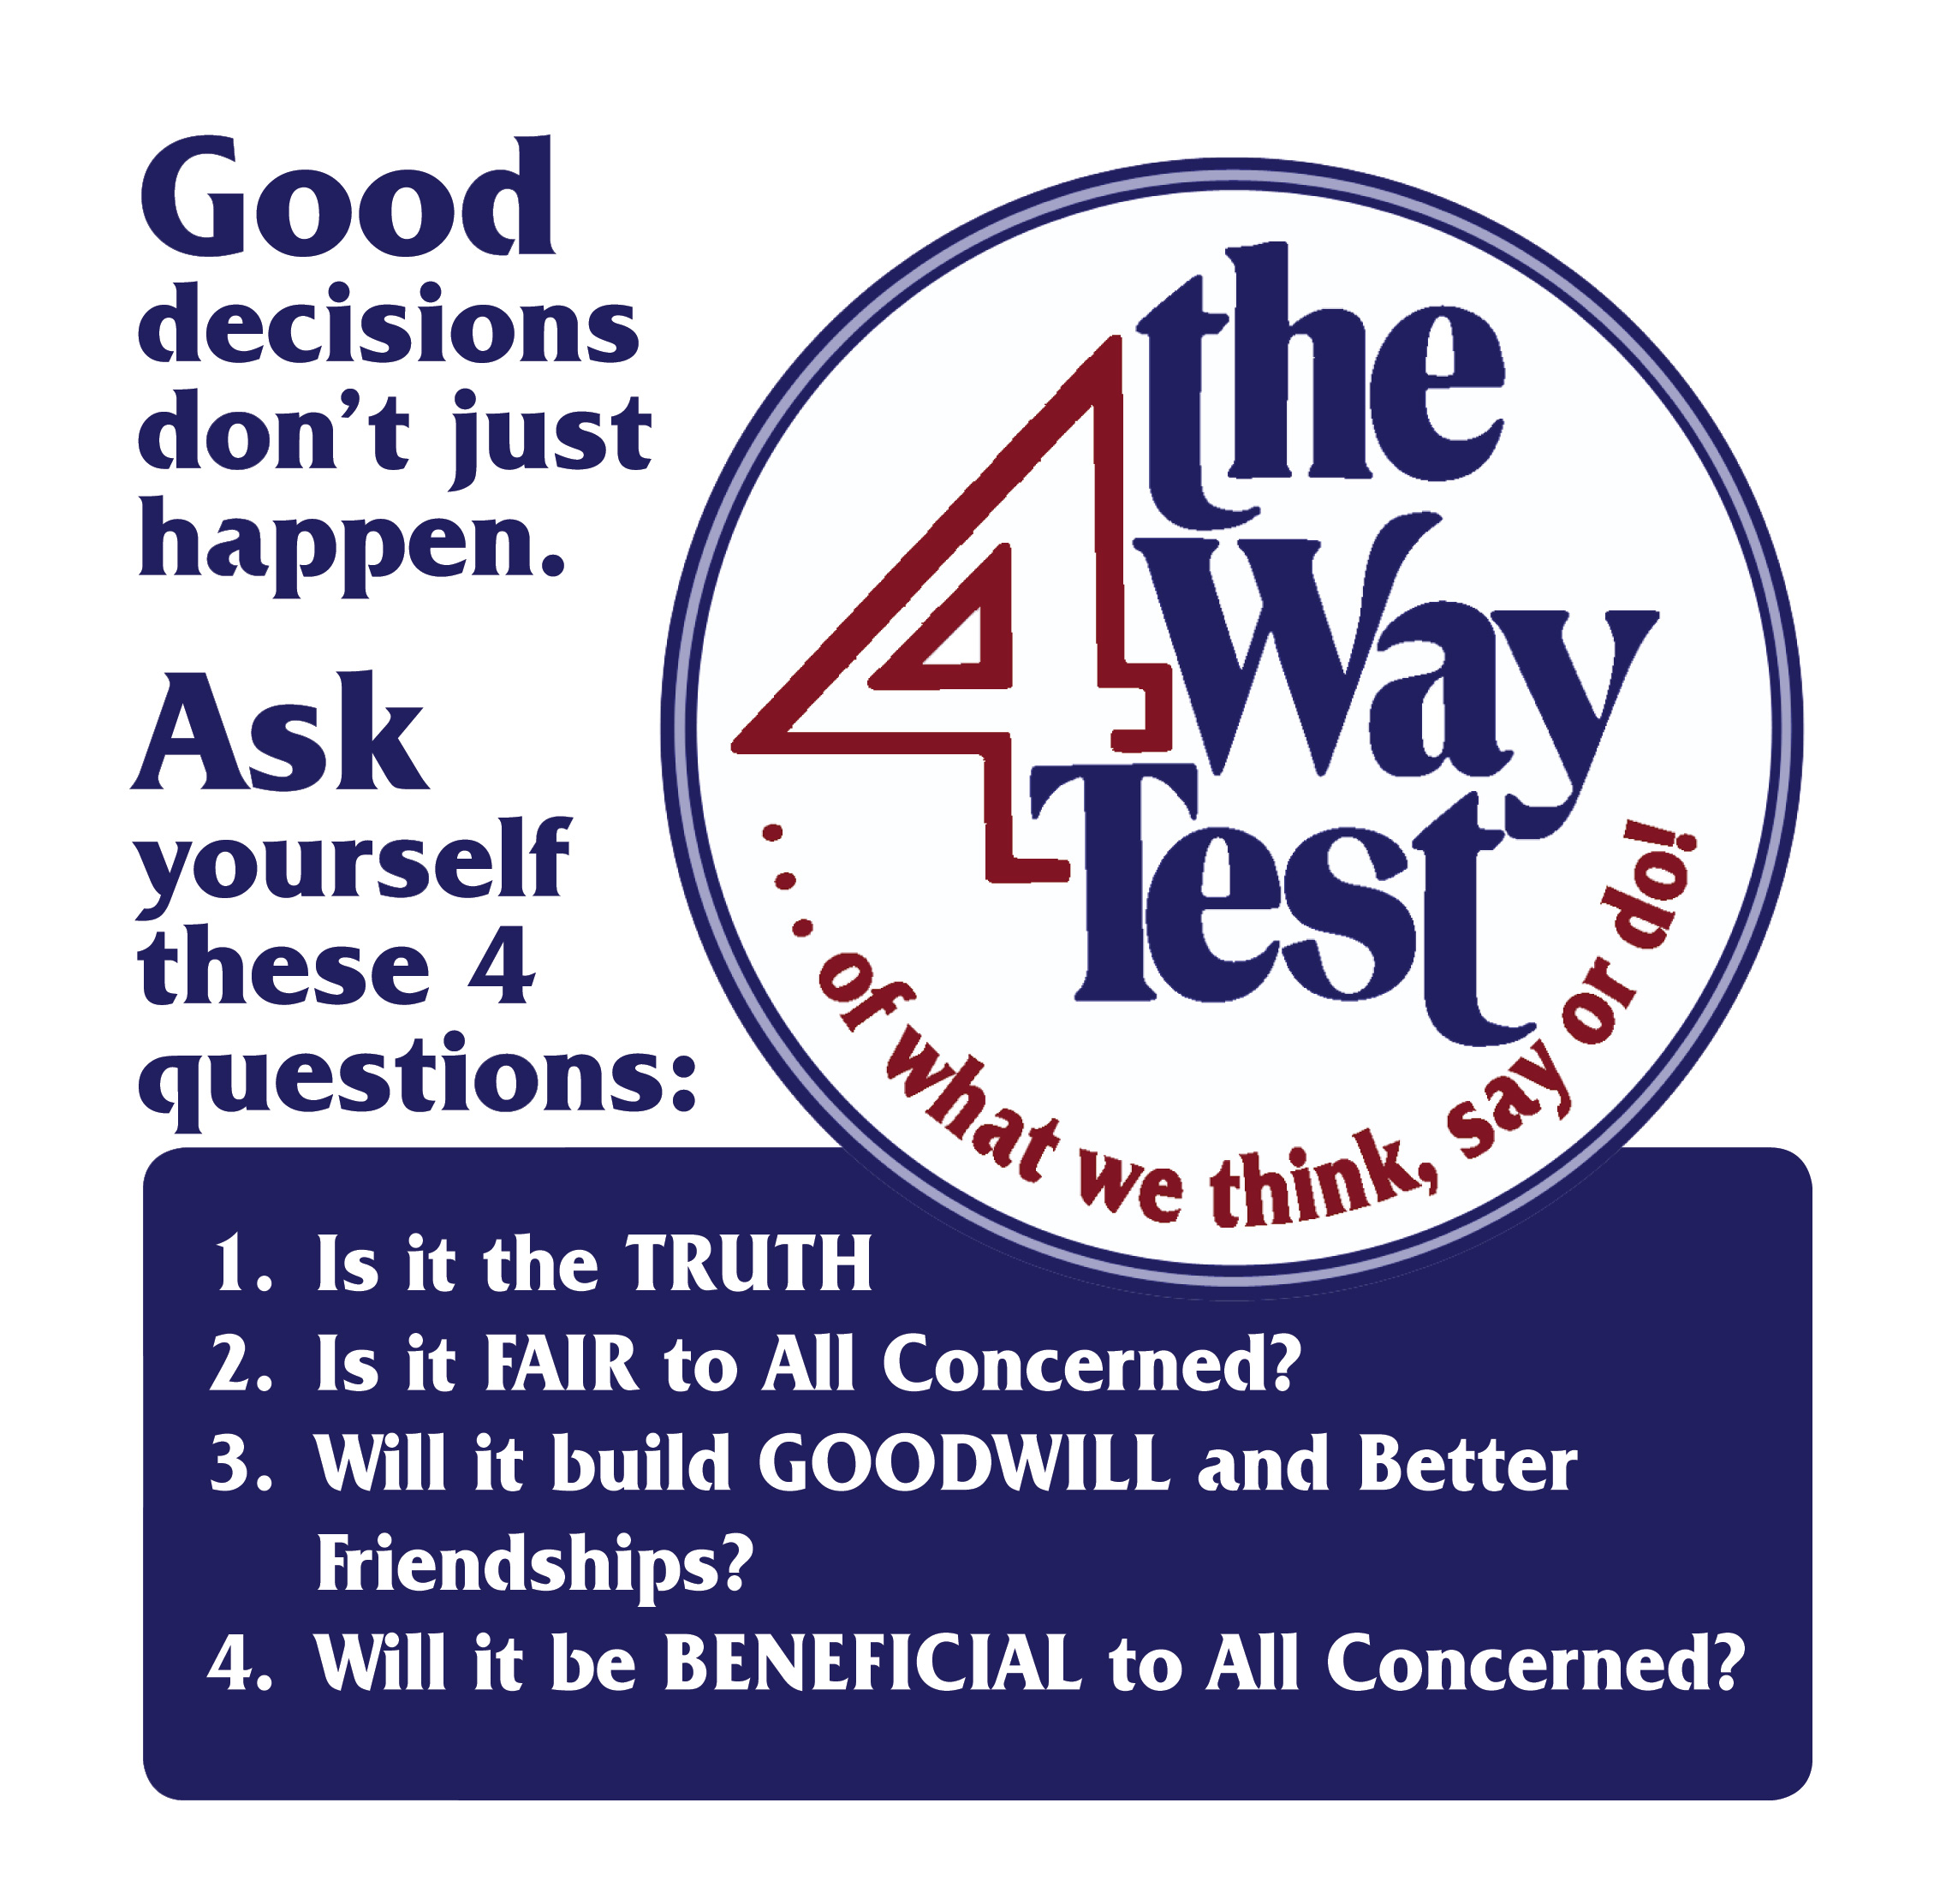 The 4 Way Test